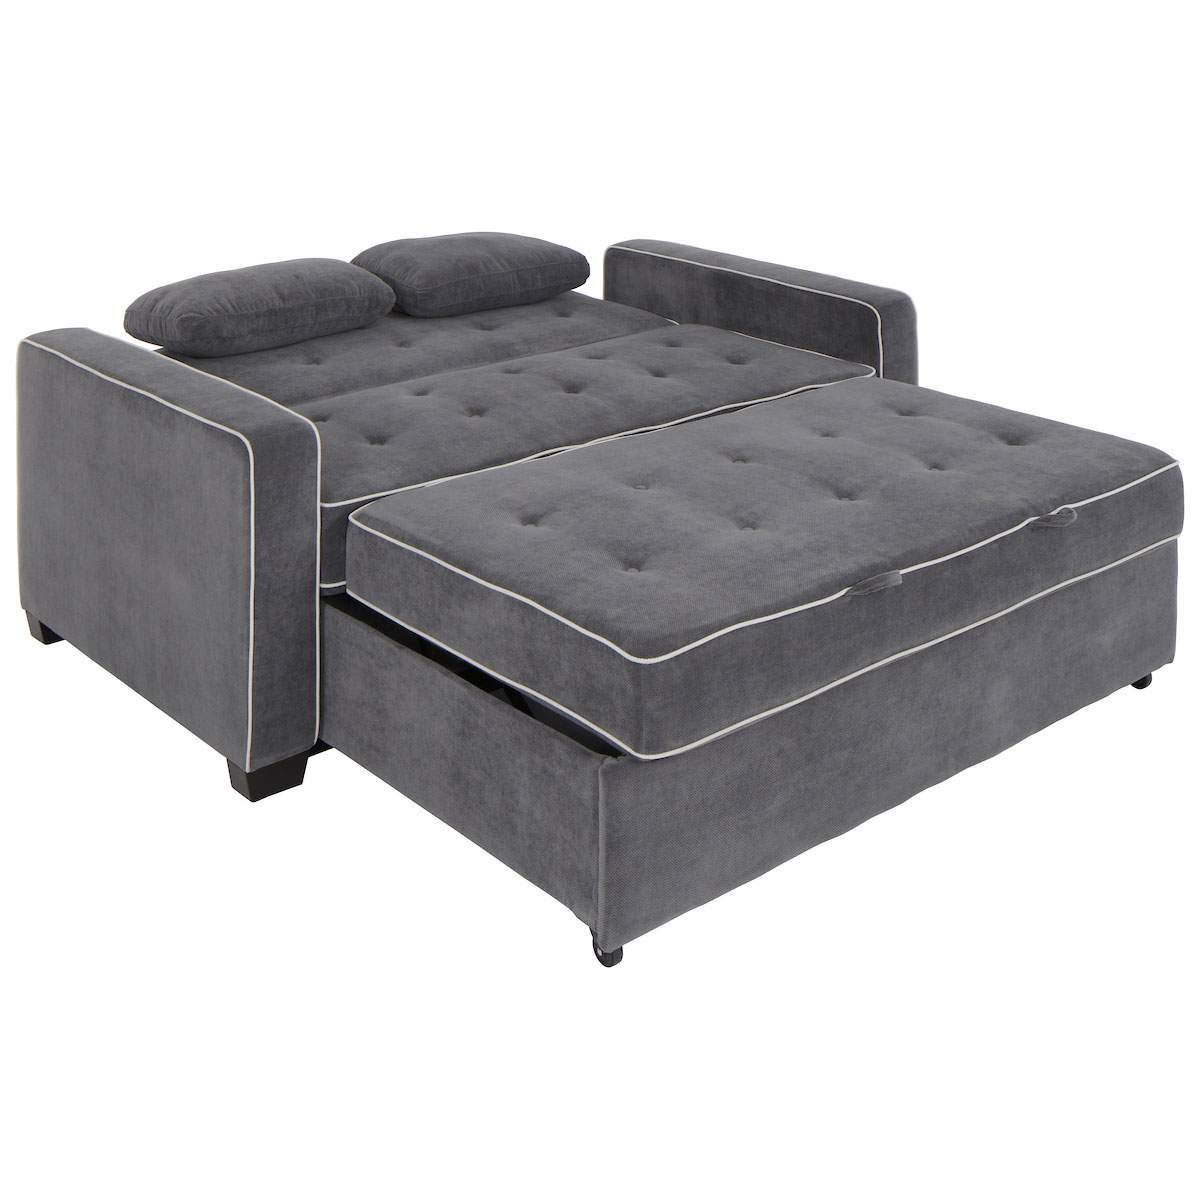 Supreme Pull Out Sofa Bed Fold Away Couch Throughout 3 In 1 Gray Pull Out Sleeper Sofas (View 12 of 20)